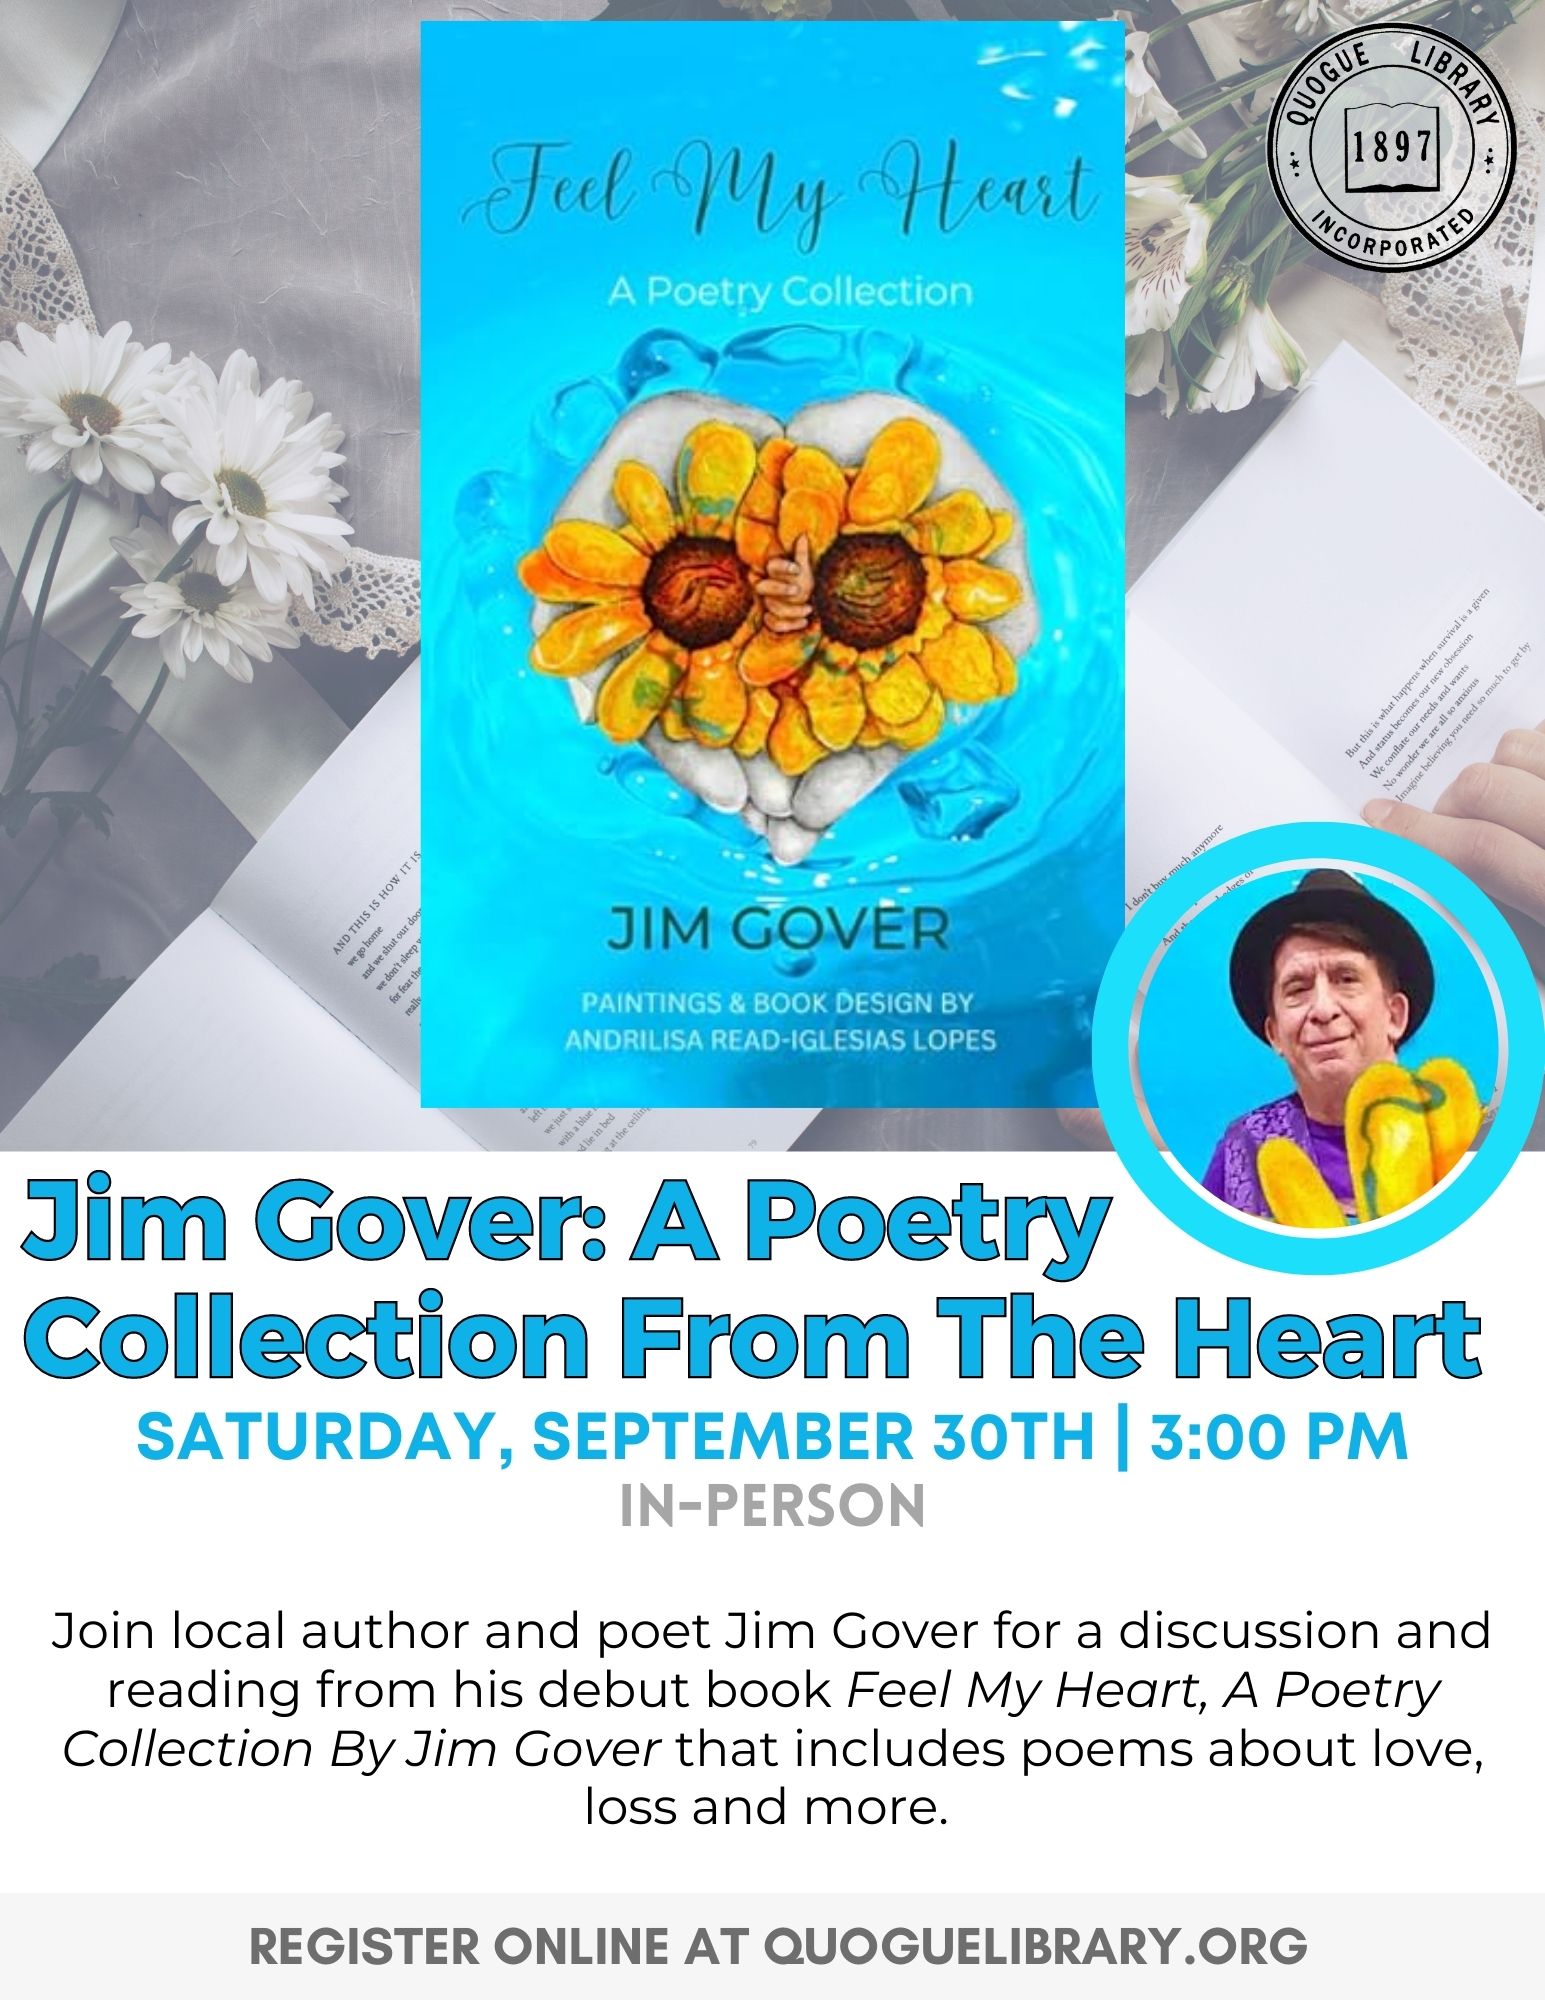 Jim Gover: A Poetry Collection From The Heart